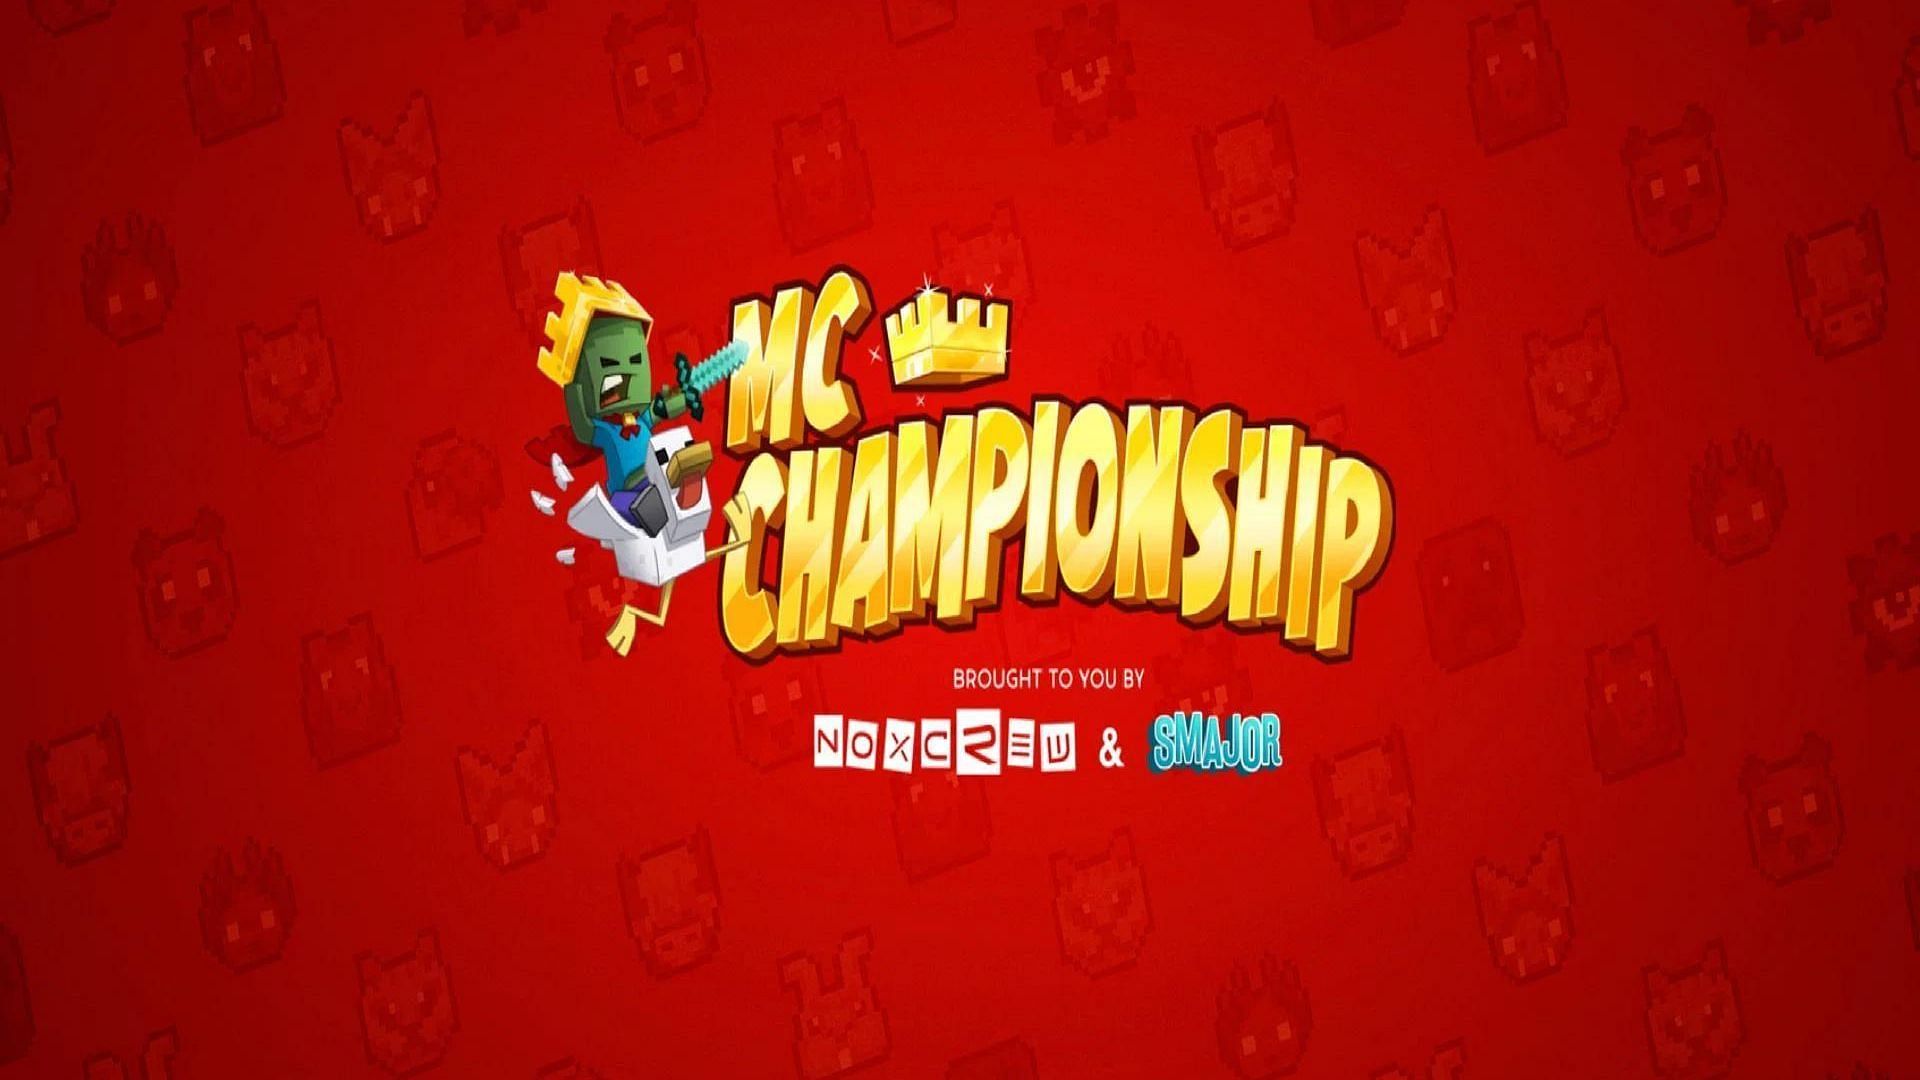 Fans of the championship should keep their calendars marked for May 28th (Image via Minecraft Championships)